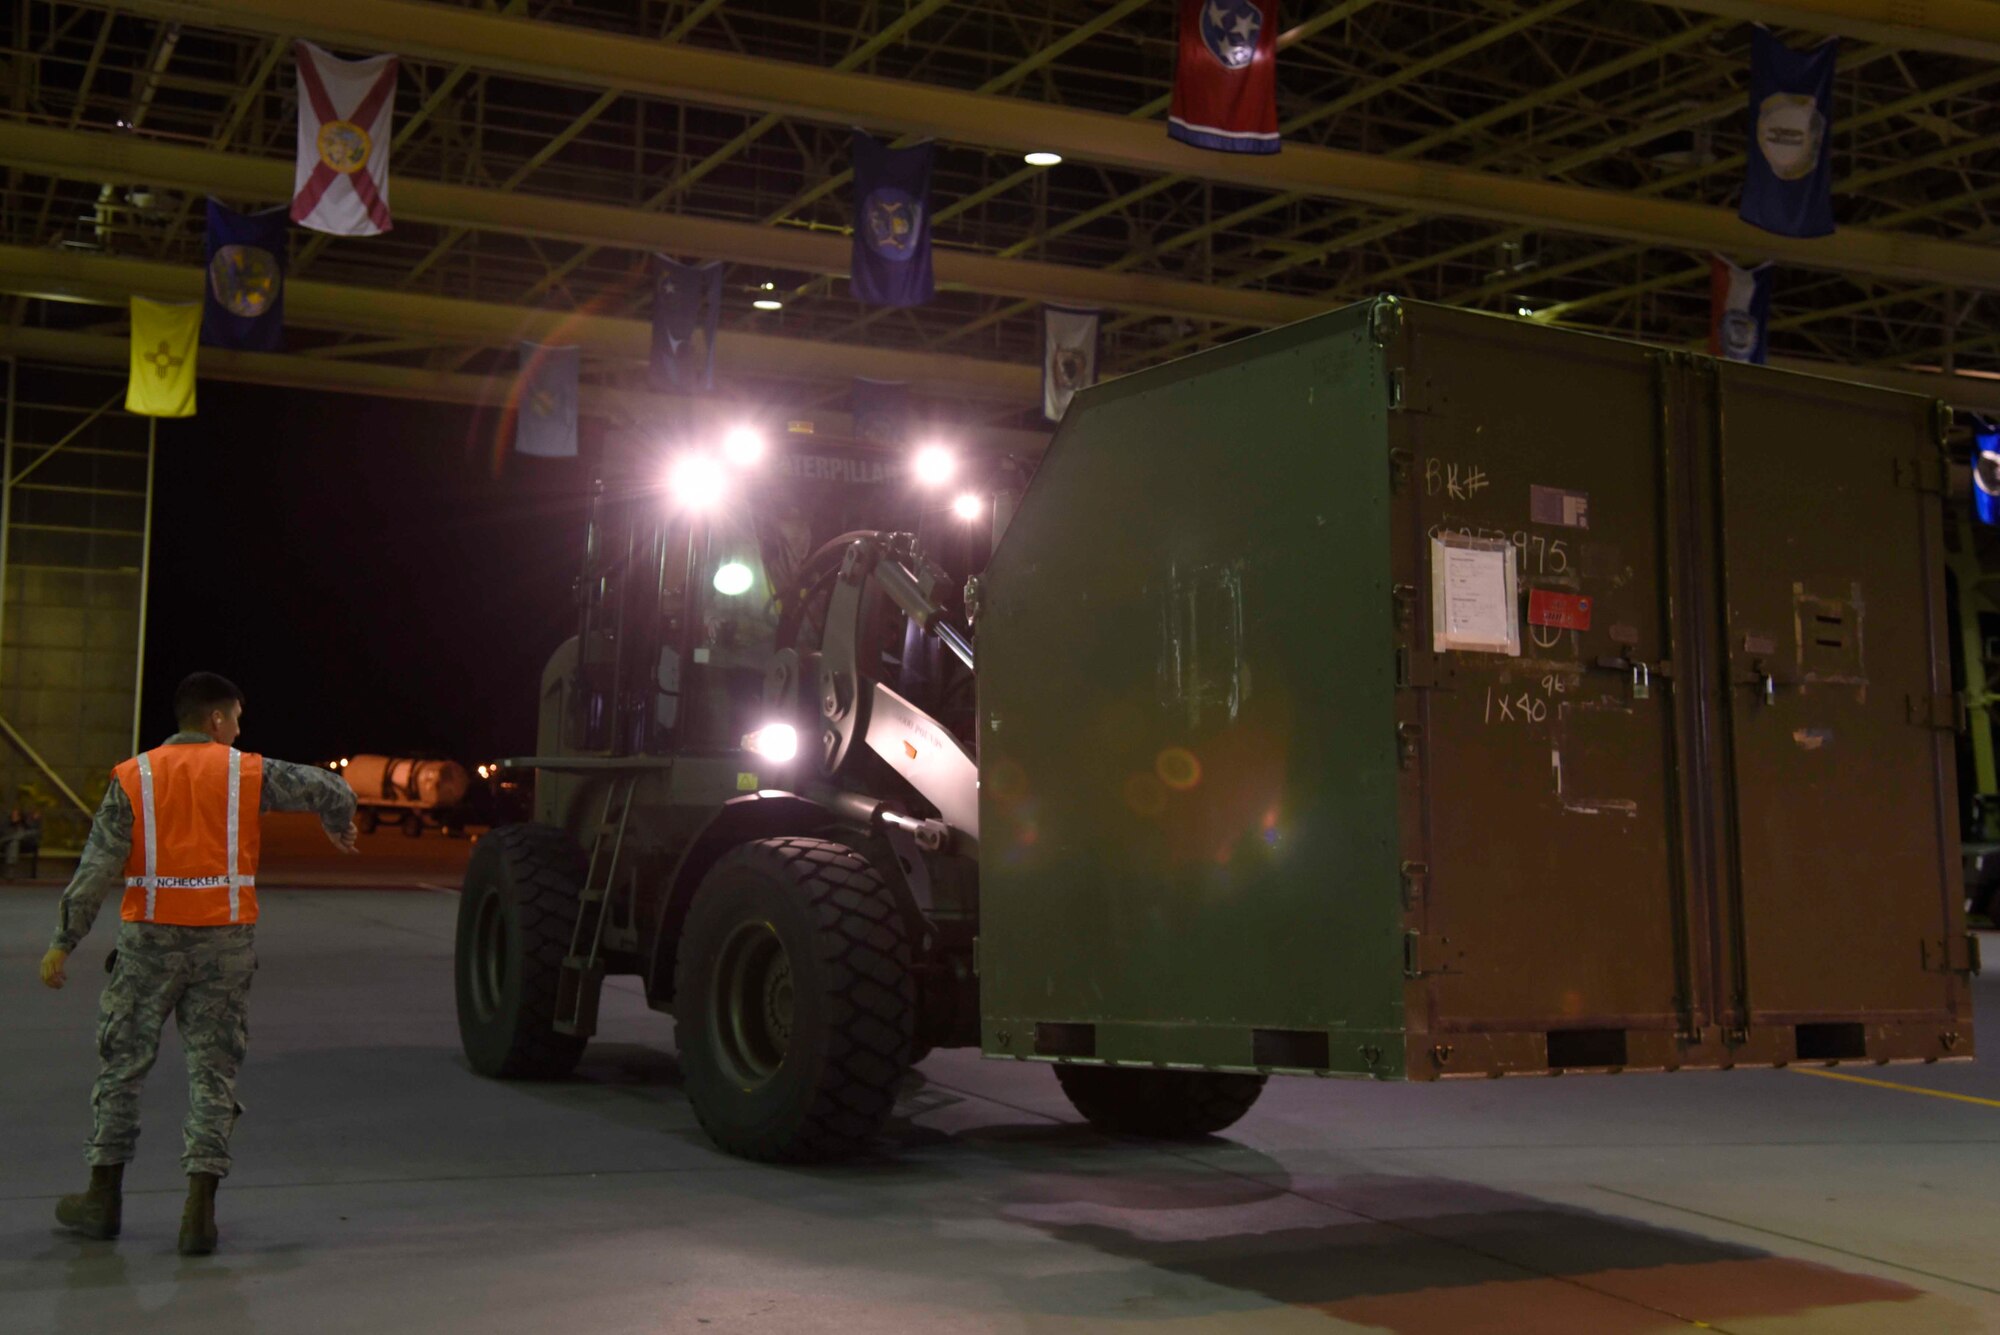 Airmen with the 35th Fighter Wing prepare cargo pallets for loading during exercise Beverly Sunrise 16-01 at Misawa Air Base, Japan, Nov. 1, 2015. Overseen by members from the 35th Logistics Readiness Squadron, augmentees packed cargo into the designated configuration appropriate for loading onto a C-130 Hercules aircraft. After loading was completed, cargo and personnel flew to Osan Air Base, South Korea, where both were utilized during the exercise. (U.S. Air Force photo by Airman 1st Class Jordyn Fetter/Released)